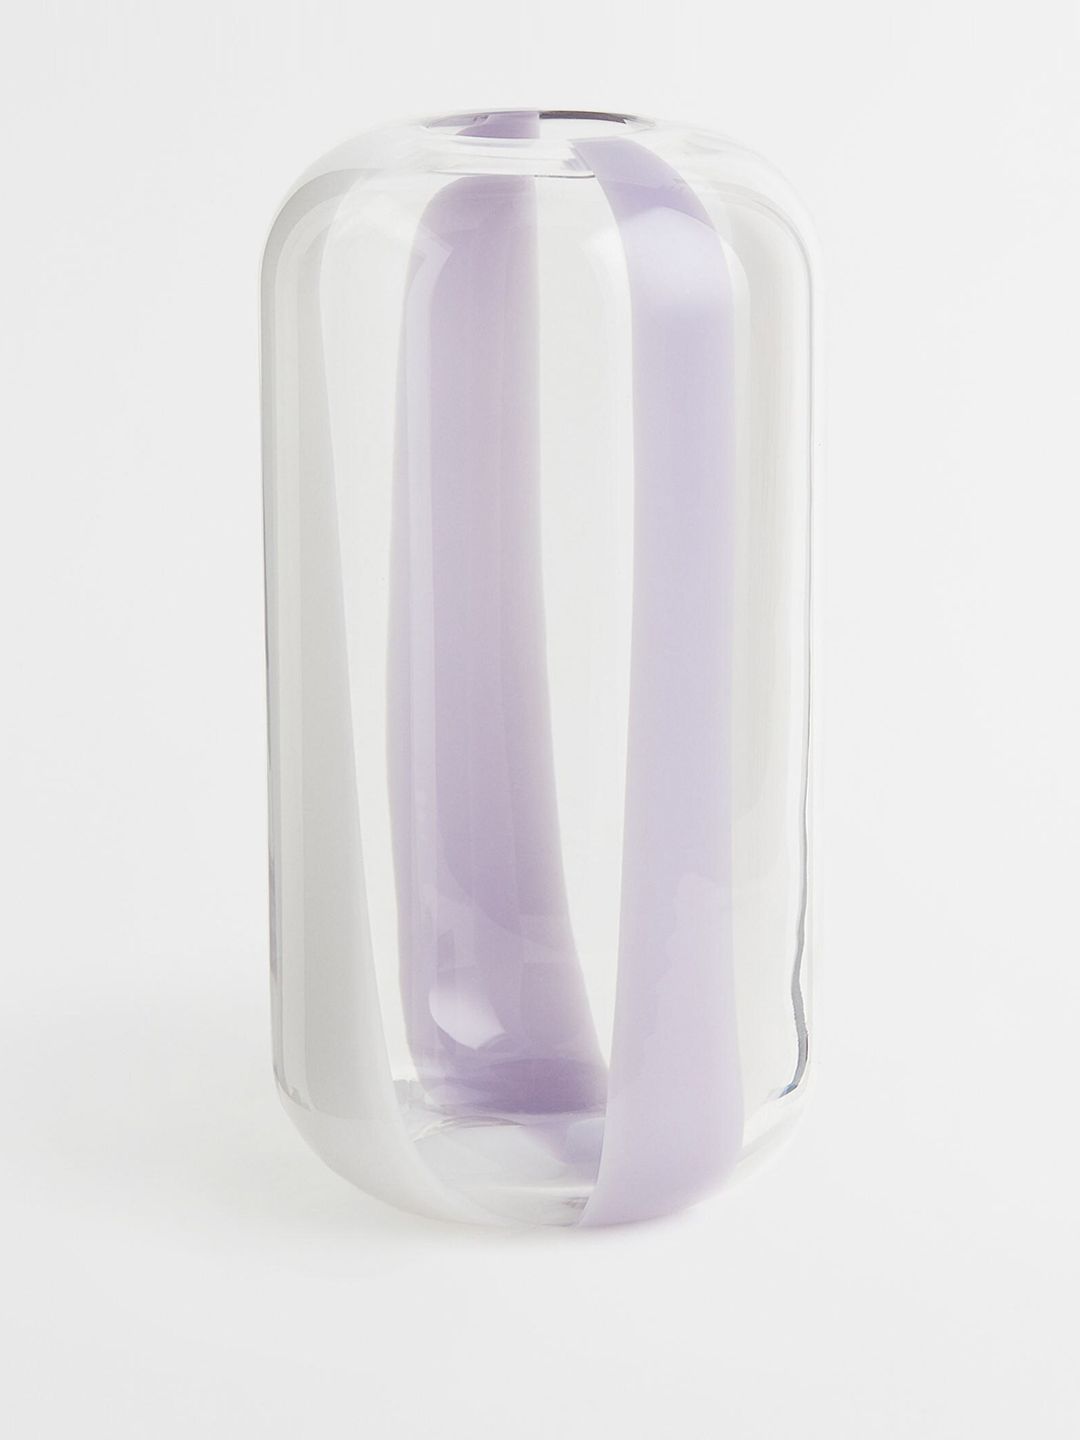 H&M Purple Patterned Glass Vase Price in India